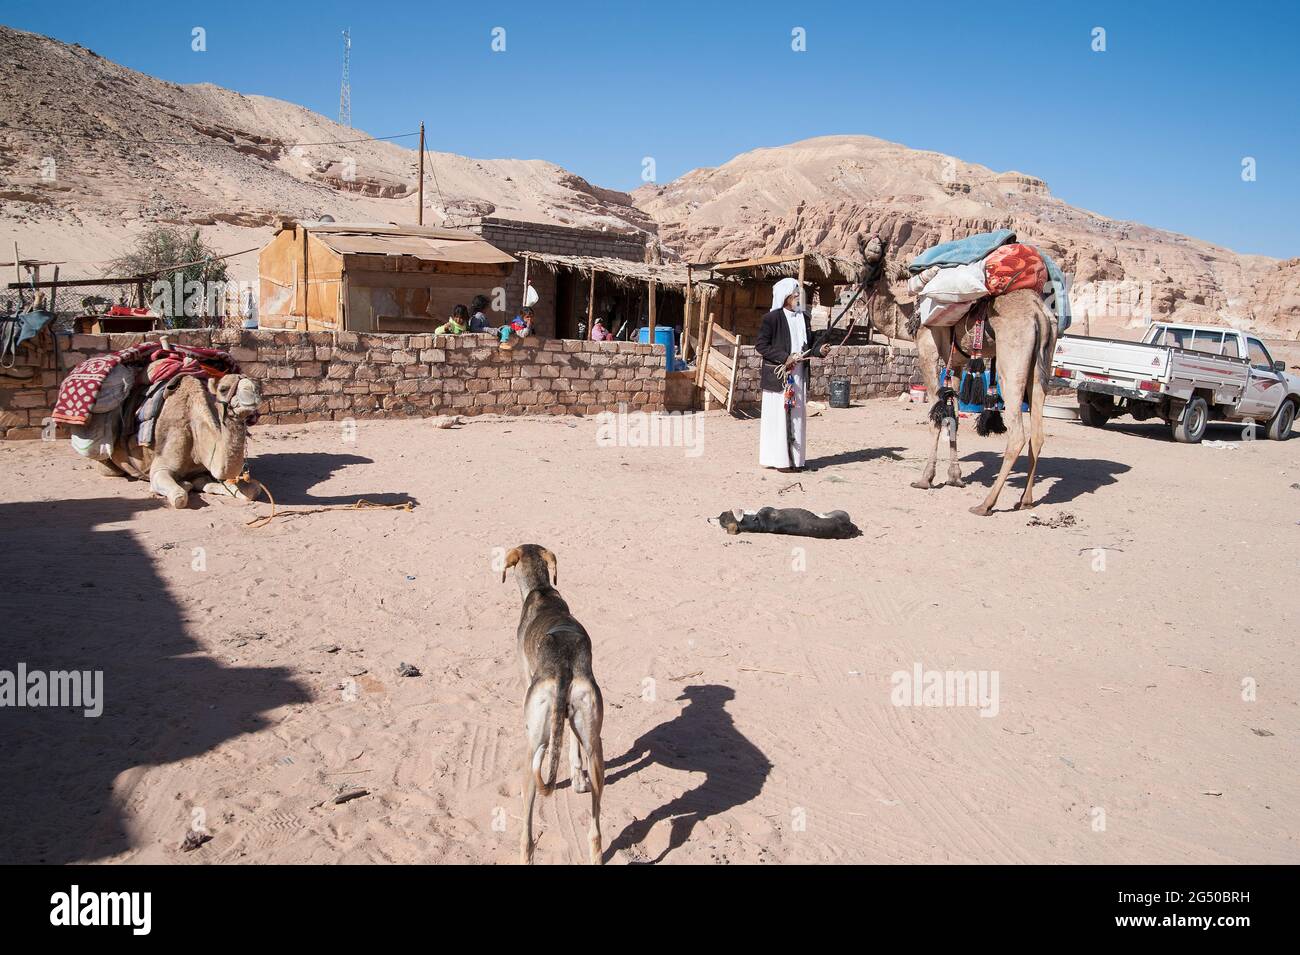 EGYPT, SINAI: Together with Bedouin Soliman Al Ashrab from the Mzaina tribe, 2 camels and 2 dogs did I walk for four days through the desert close to Stock Photo